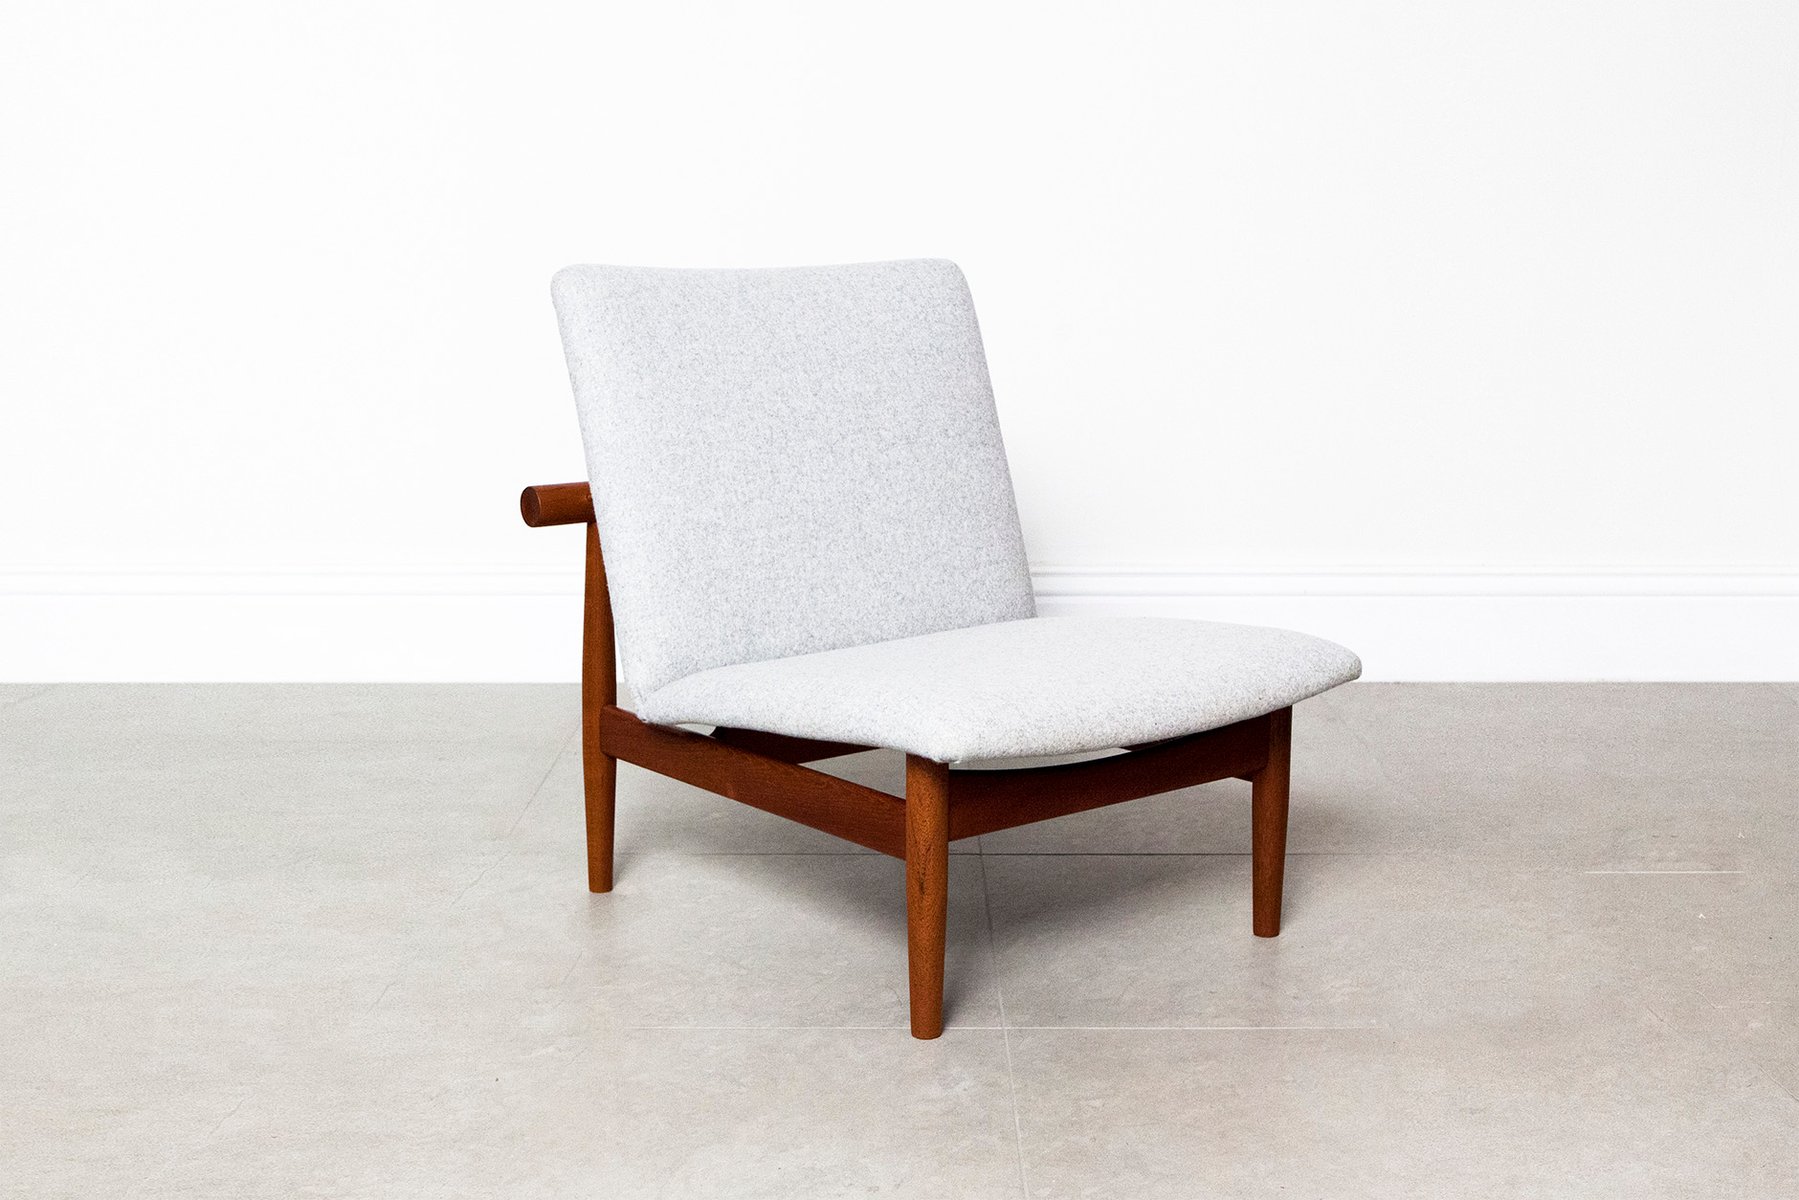 Japan Chair by Finn Juhl for France & Son, 1950s for sale at Pamono